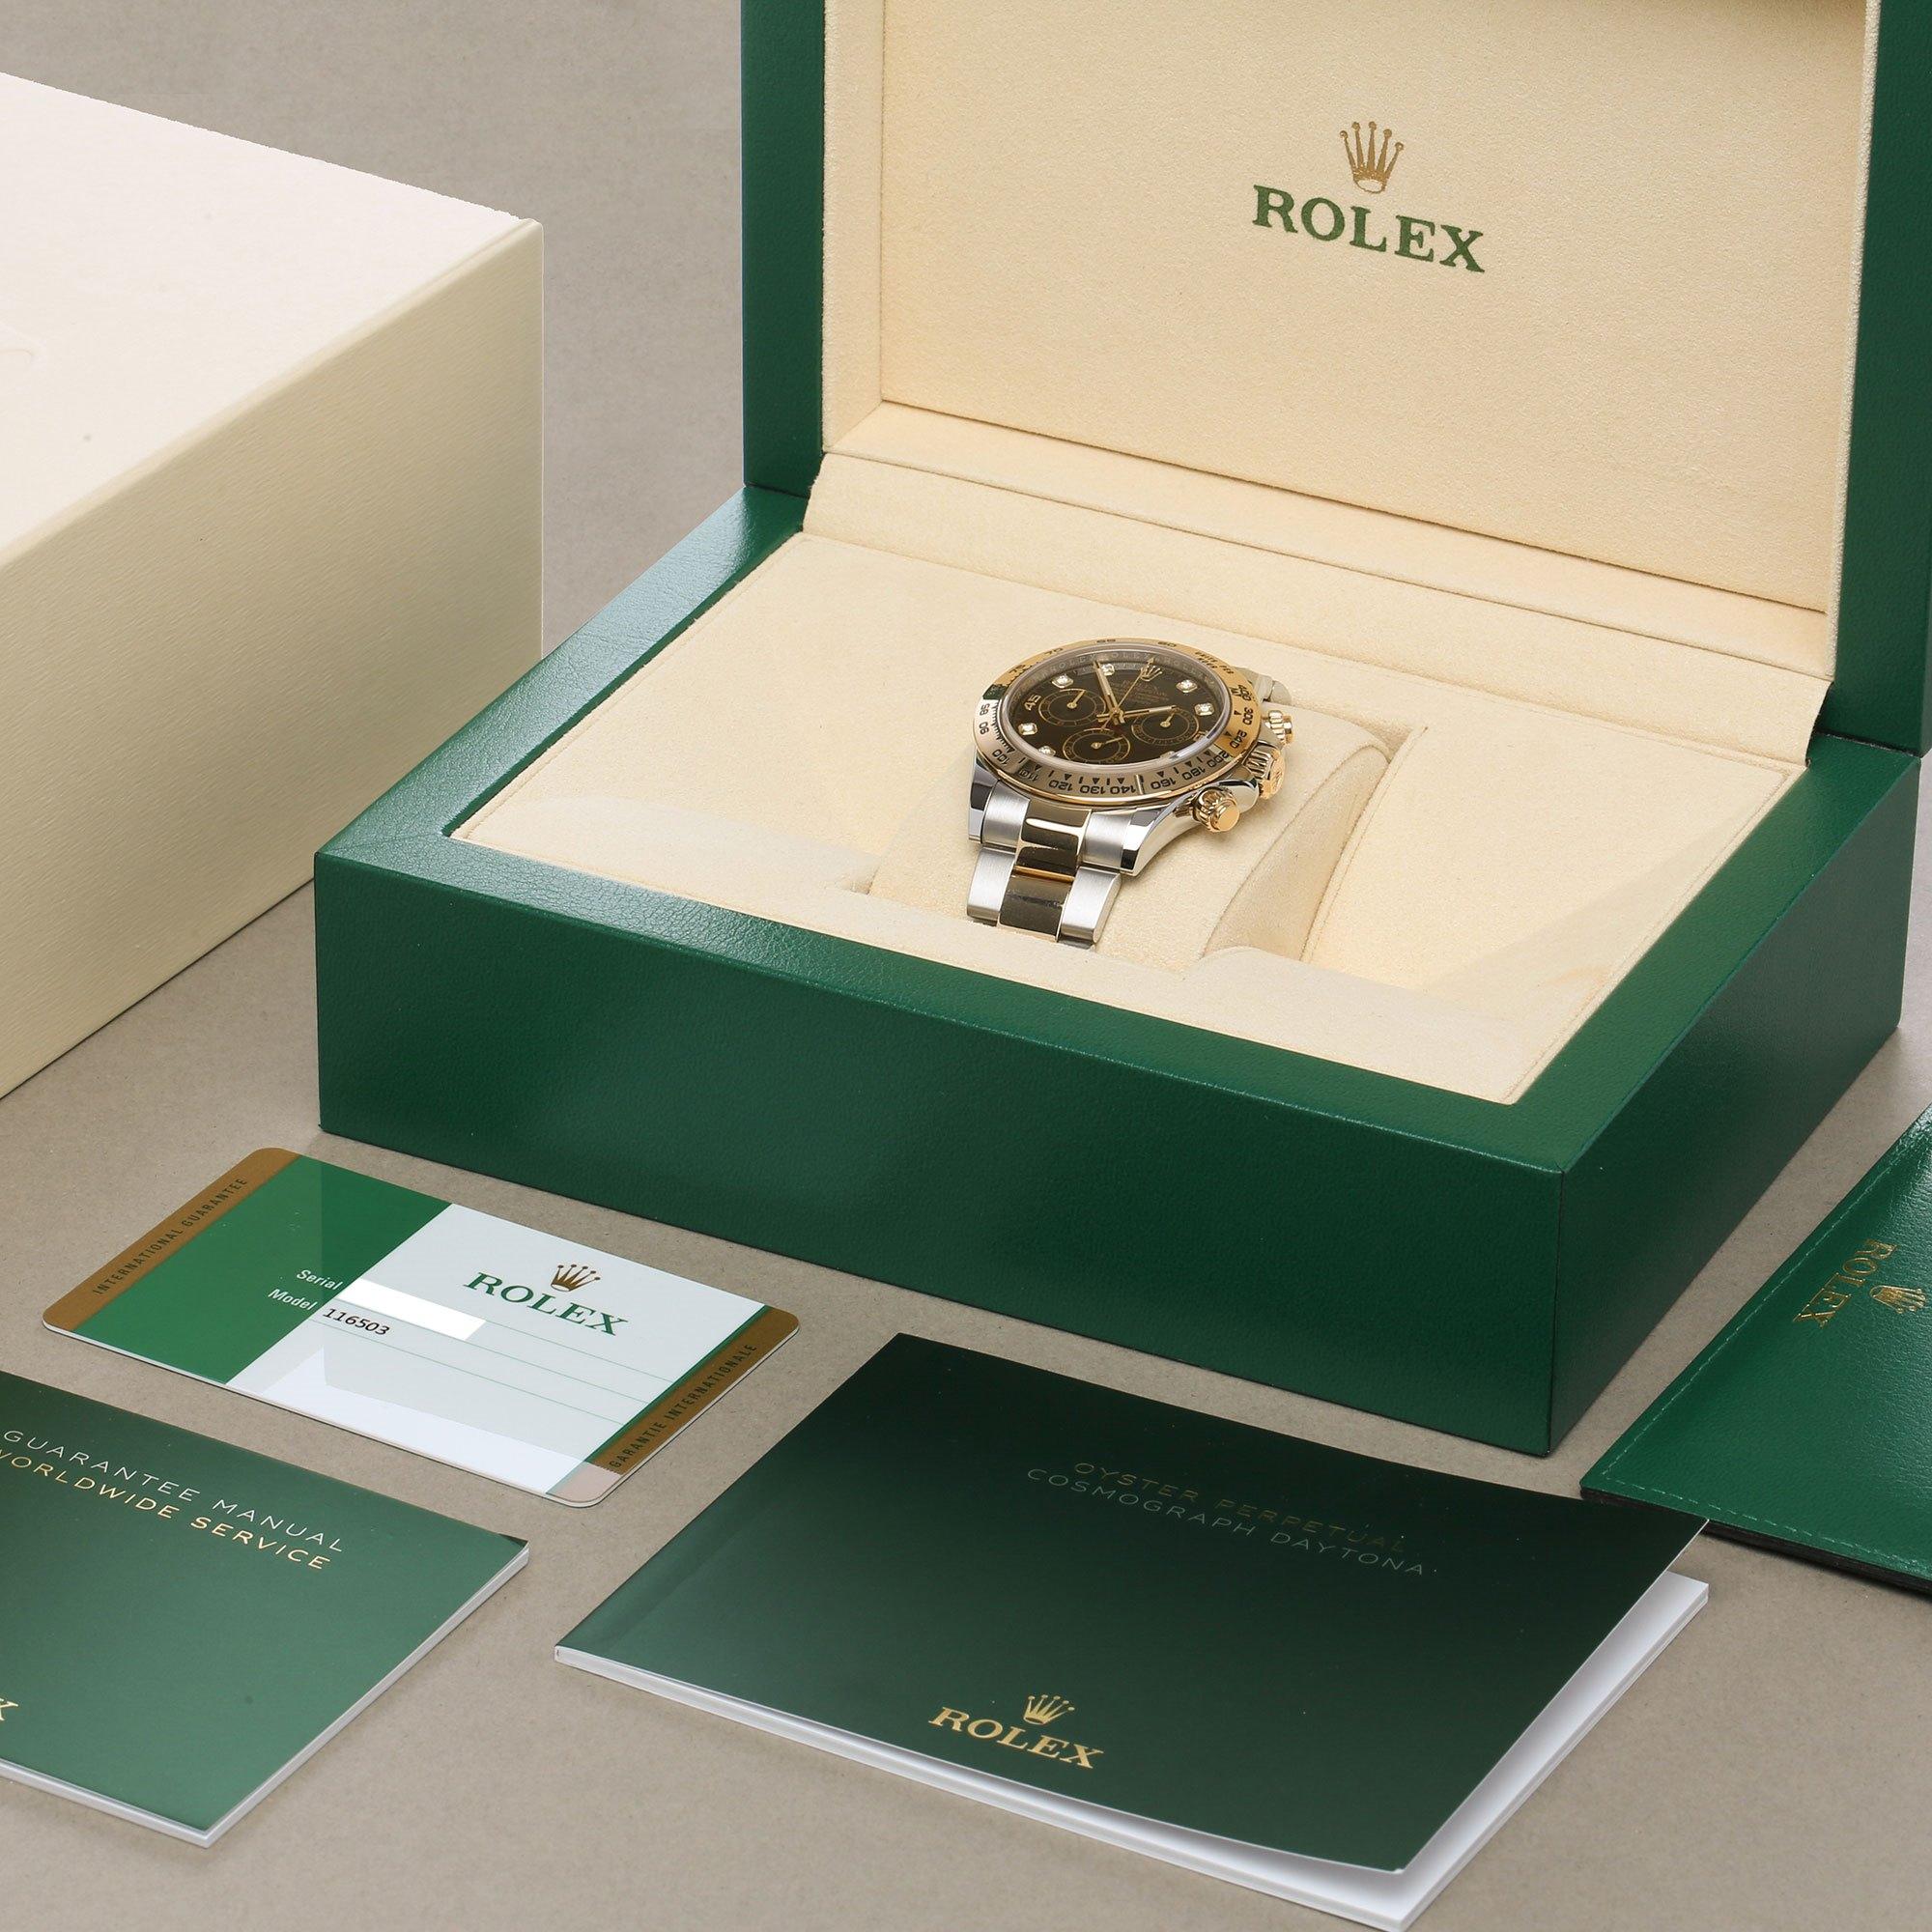 Rolex Daytona 116503 Men's Stainless Steel and Yellow Gold Cosmograph Watch 7